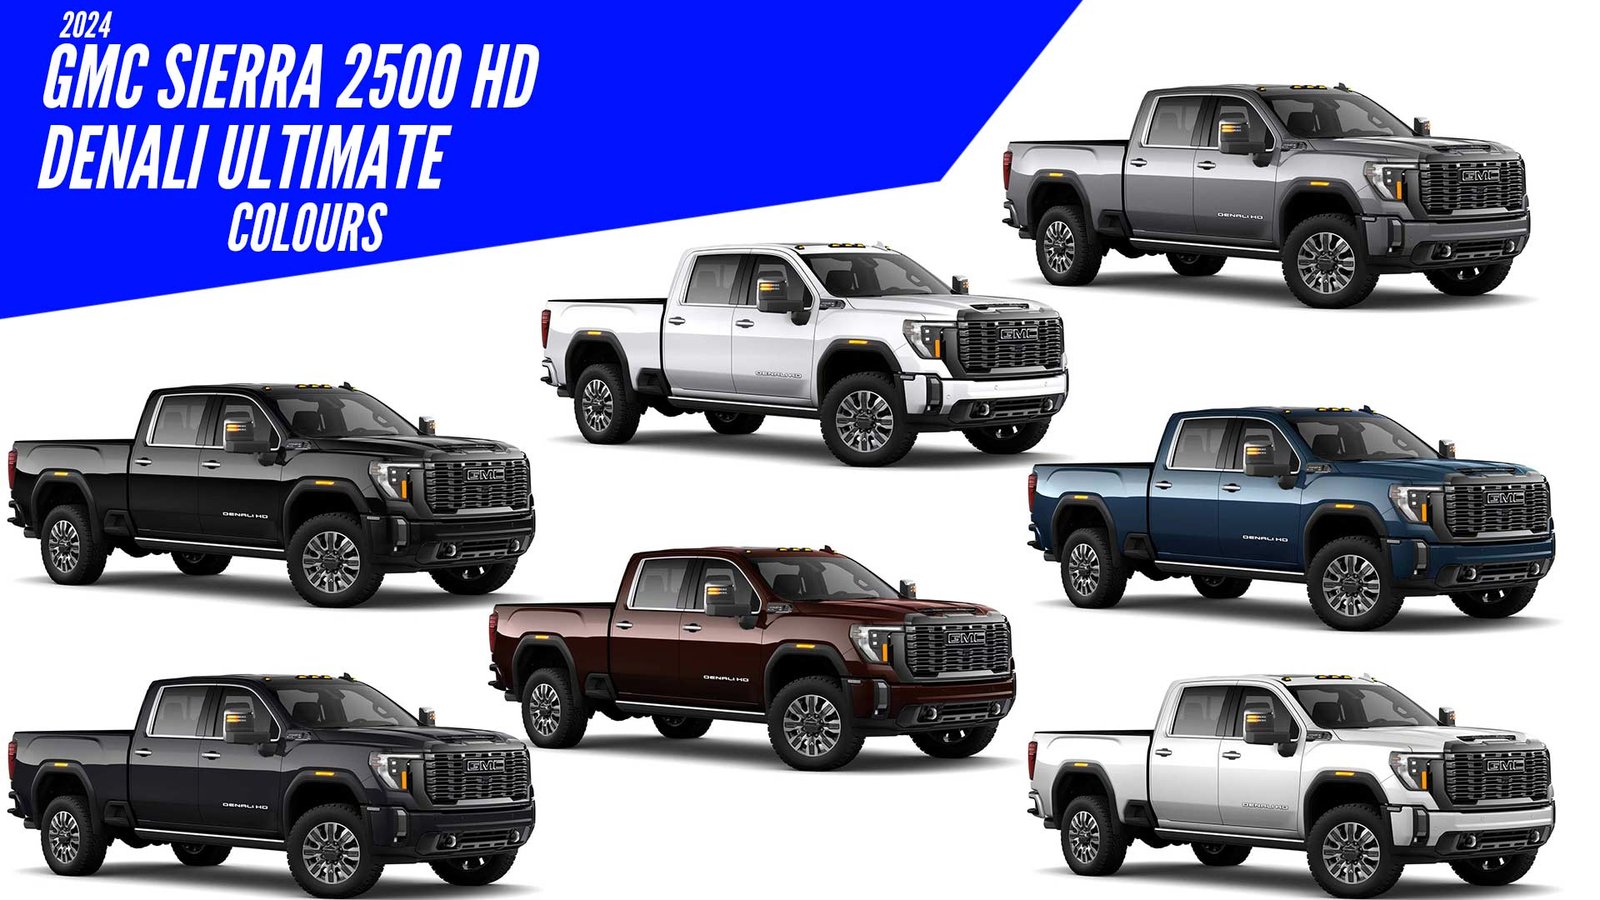 2024 GMC Sierra 2500 HD Denali Ultimate - All Color Options - Images